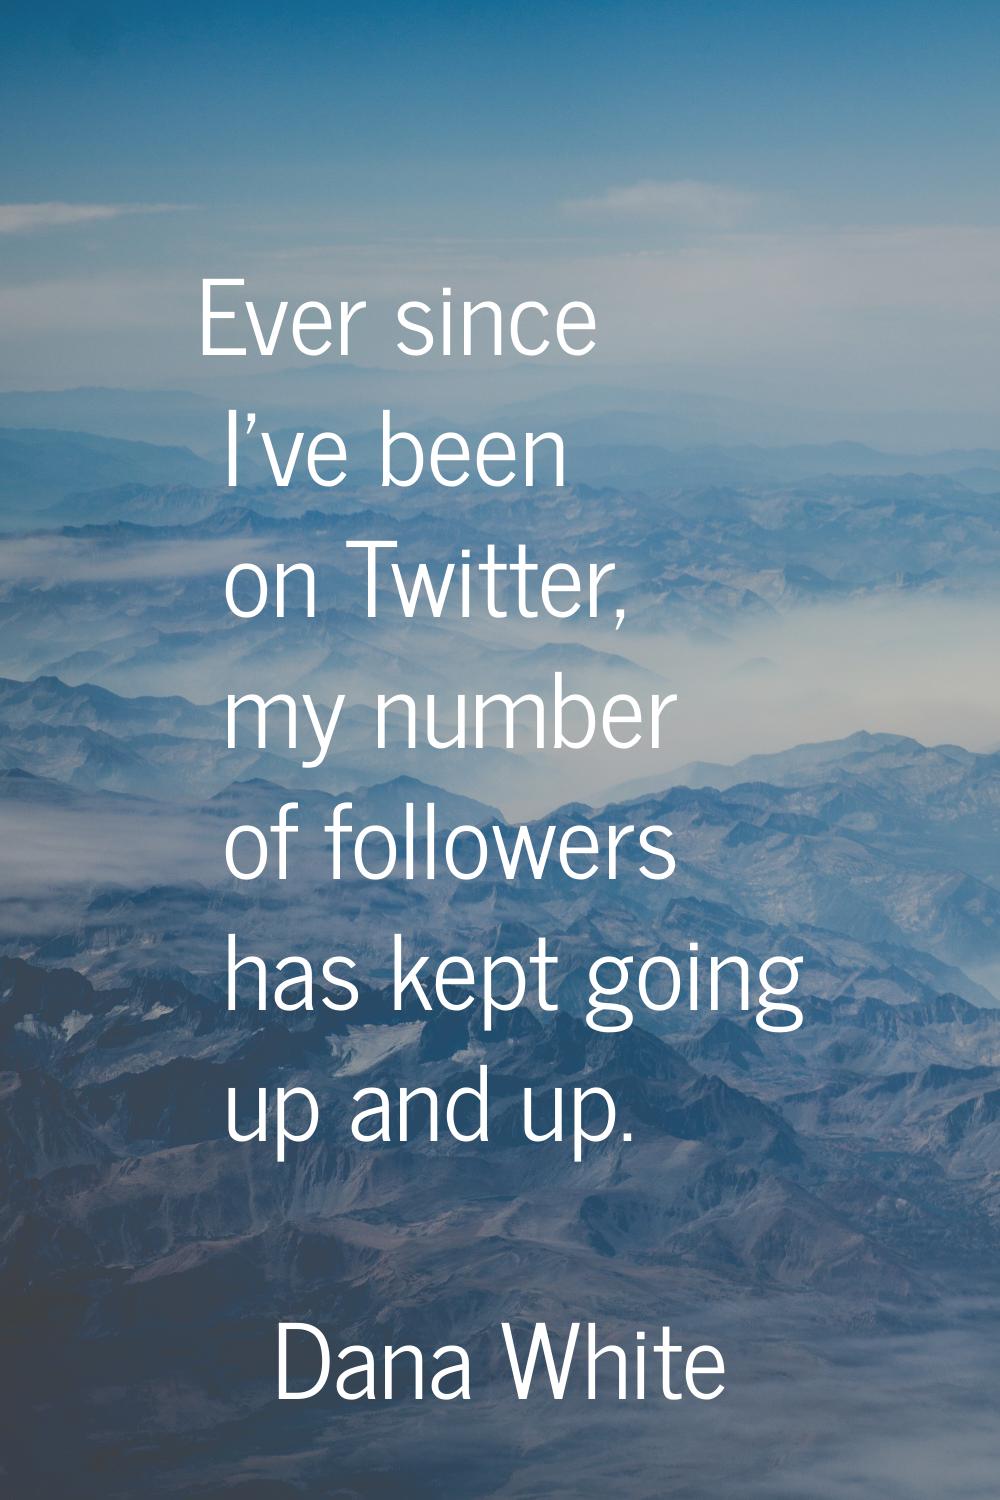 Ever since I've been on Twitter, my number of followers has kept going up and up.